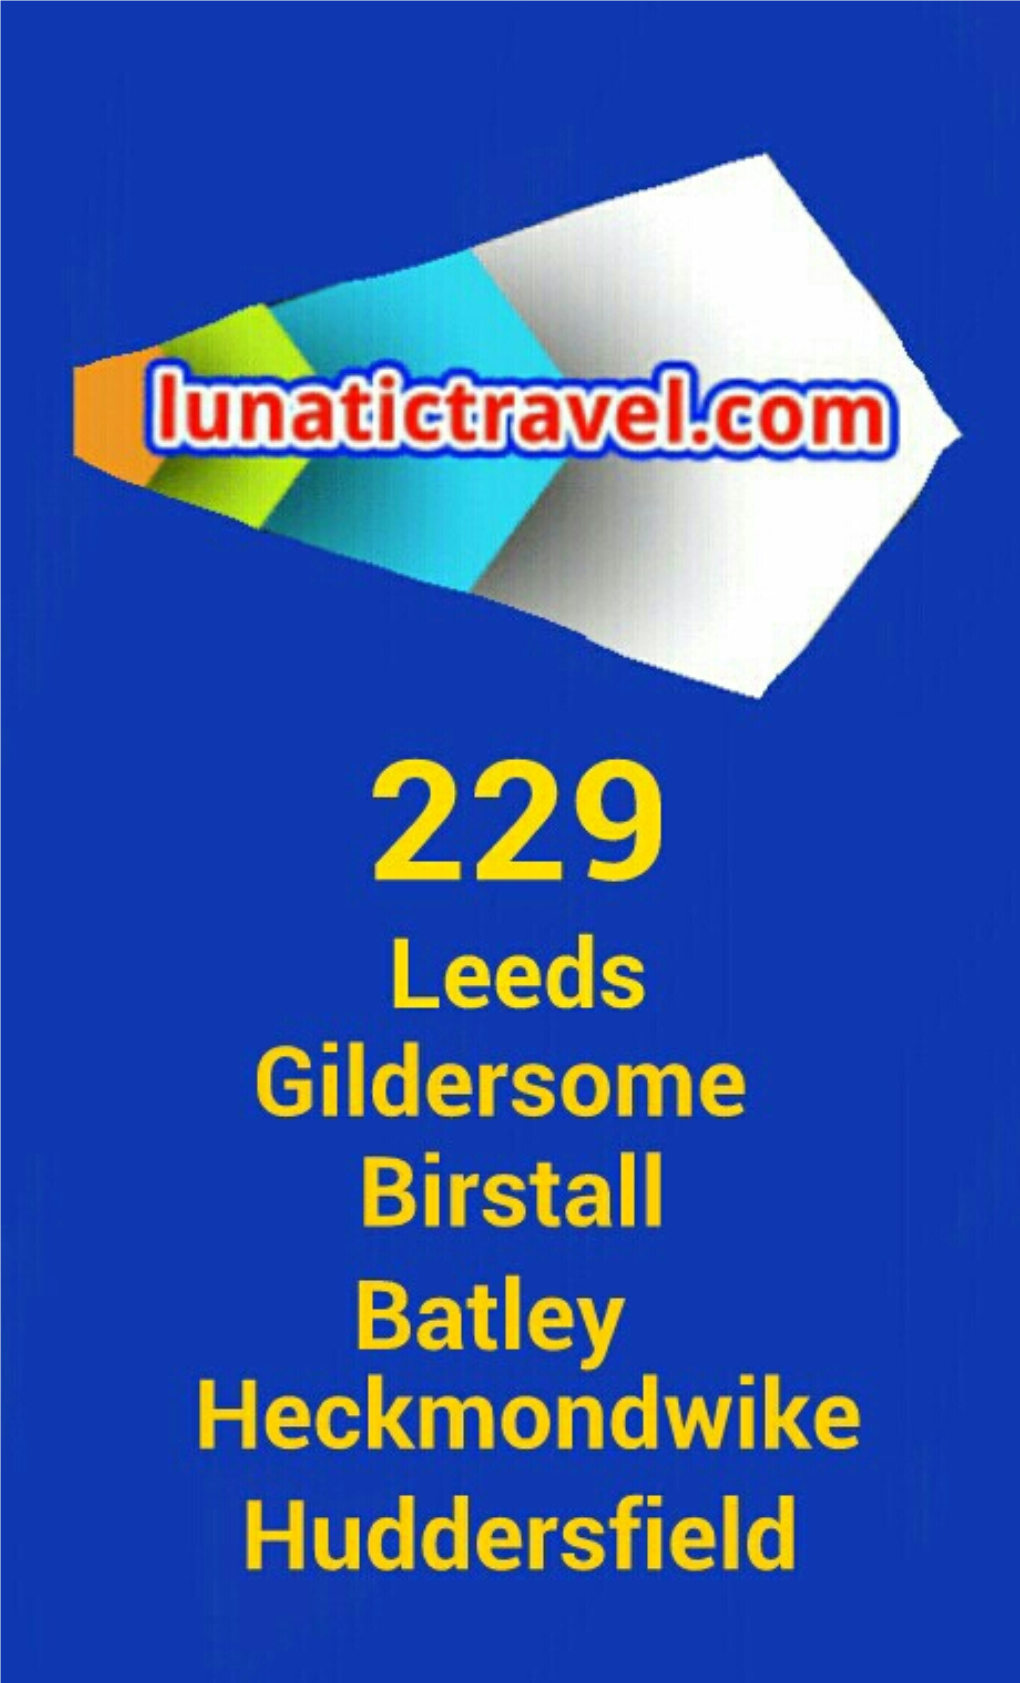 To Download the Current 229 Leeds Gildersome Birstall Batley